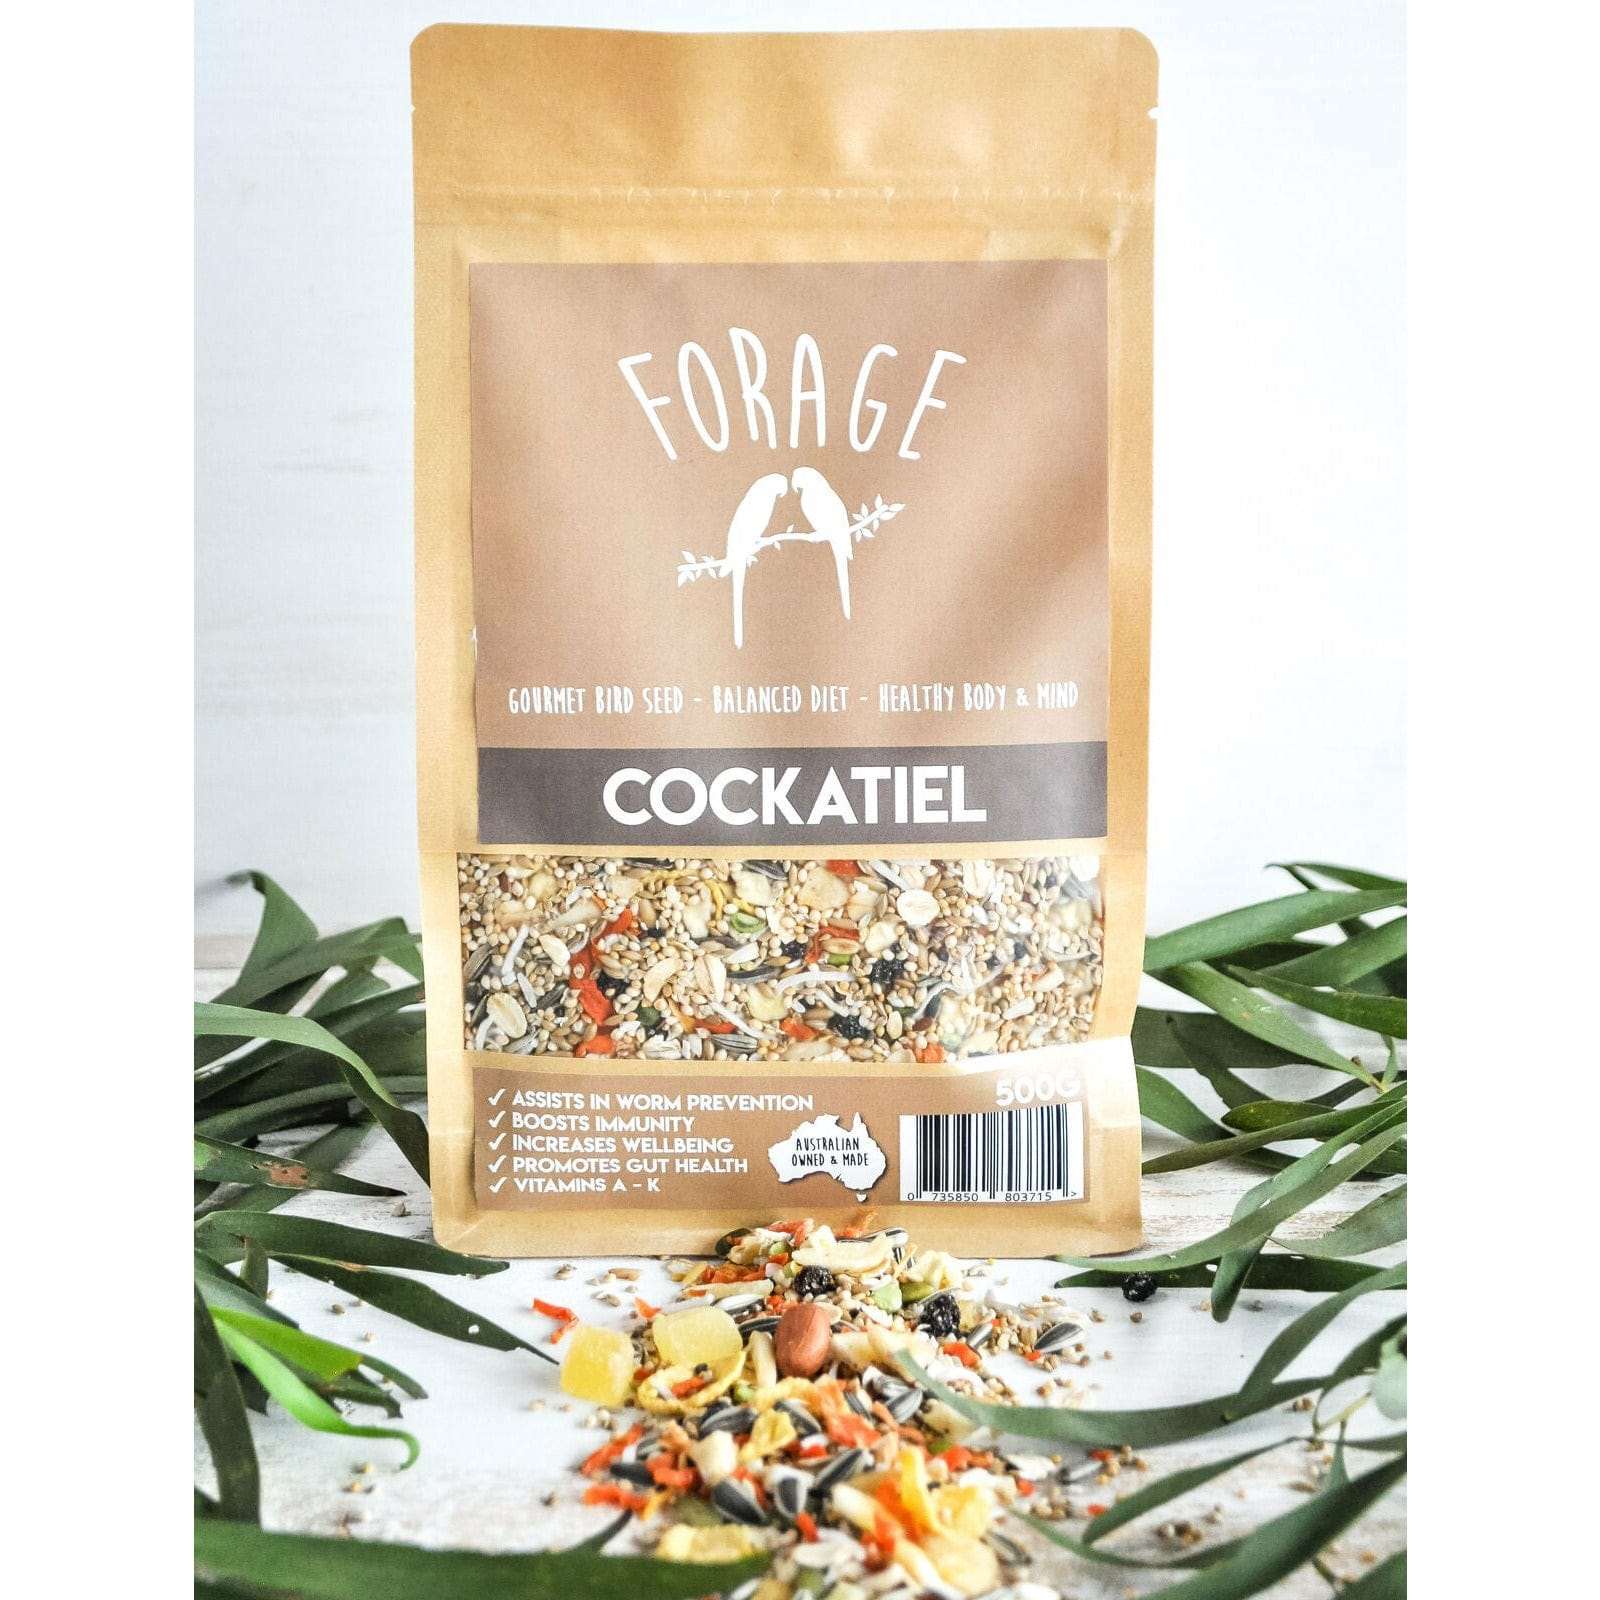 Forage Cockatiel Mix (Excl. TAS & WA) from Forage Gourmet Seed